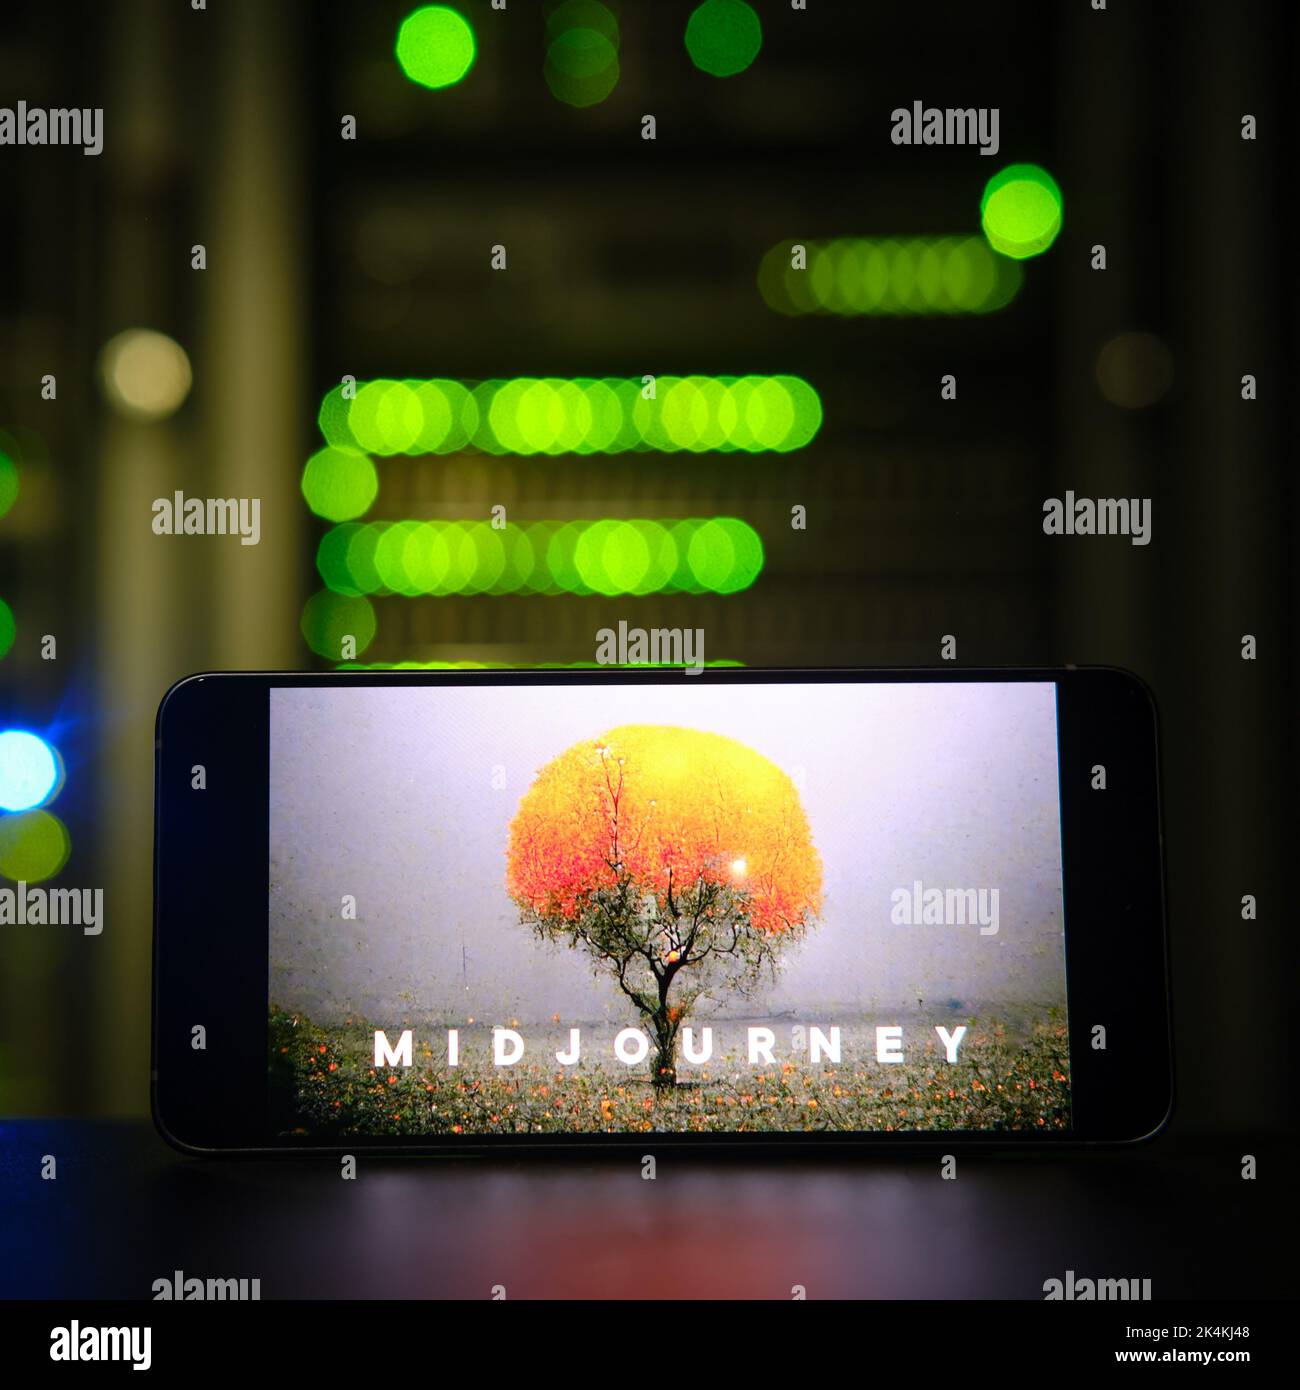 AI Midjourney logo on the phone screen on the background of the server room. Smartphone with artificial intelligence neural network logo - Moscow, Rus Stock Photo